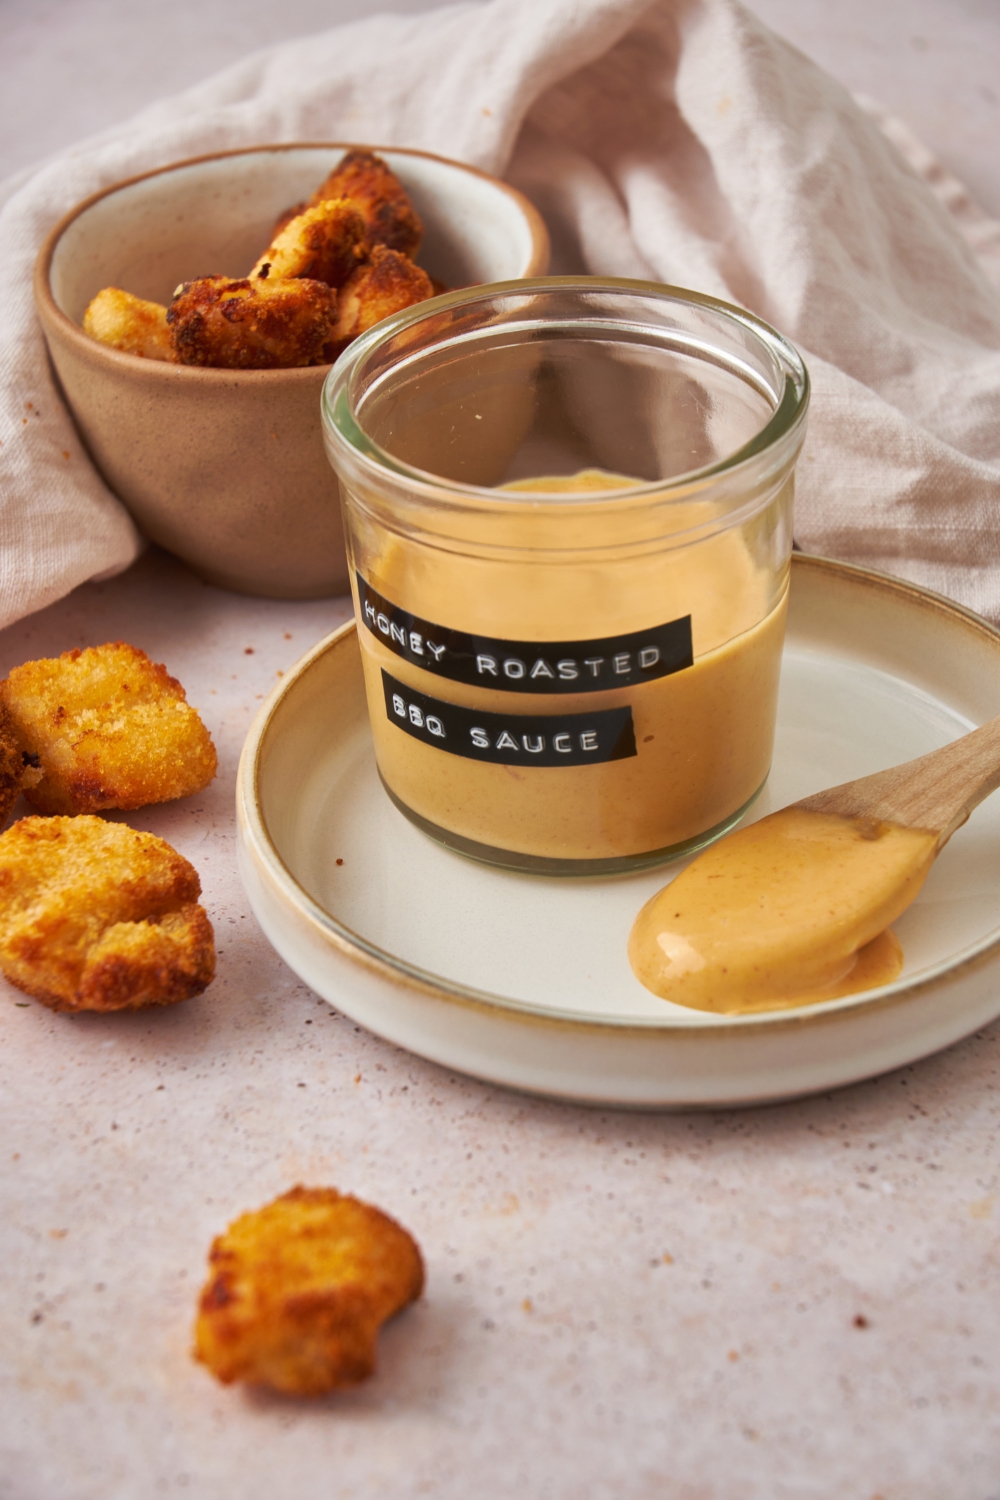 A clear jar labeled "honey roasted BBQ sauce" on a white plate with a spoonful of sauce next to it and three nuggets have fallen on the counter next to the plate.